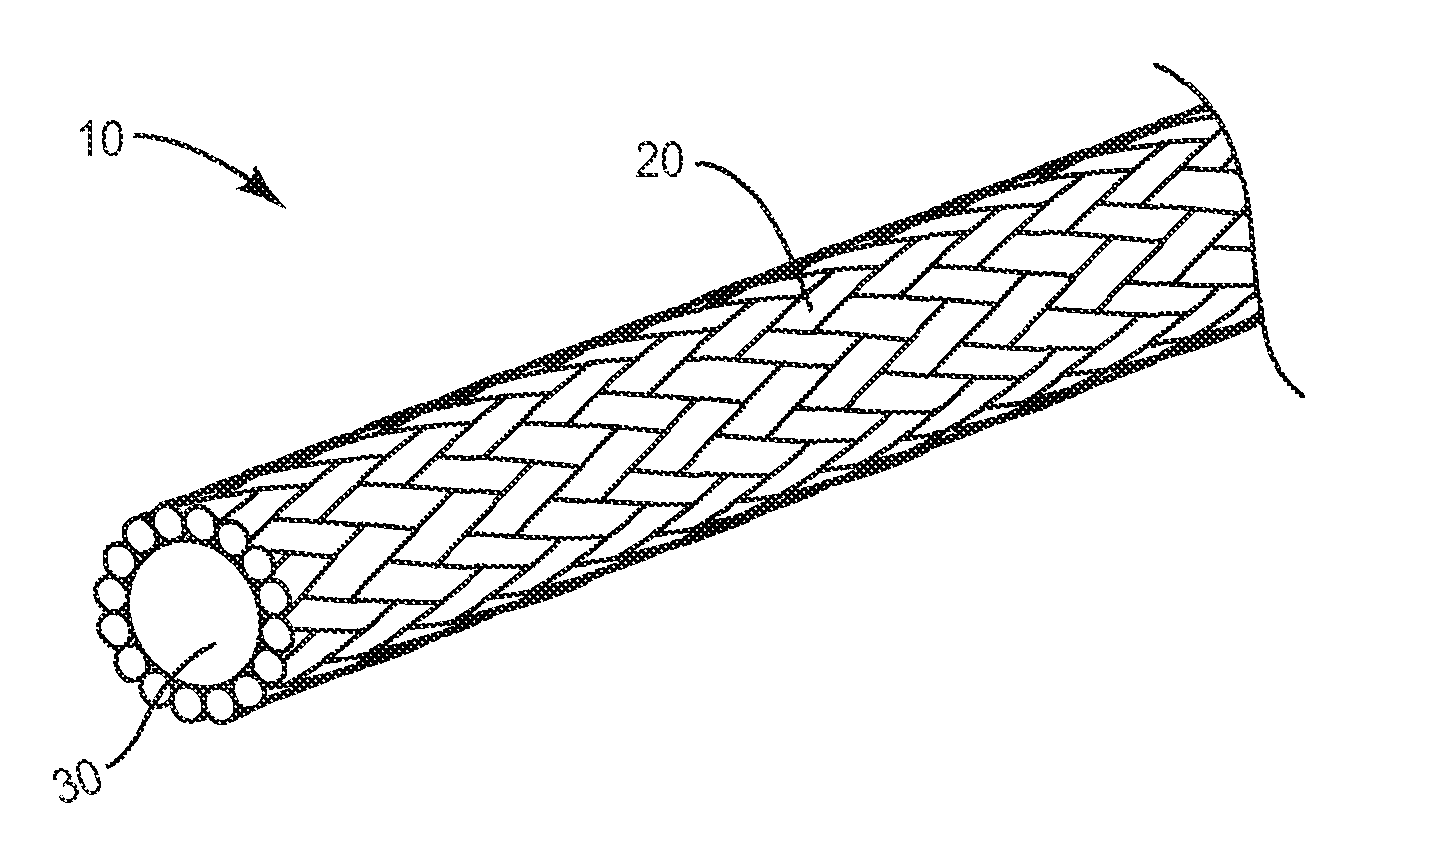 Pultrusion process for preparing composites having low percentage of fibers and articles made from same